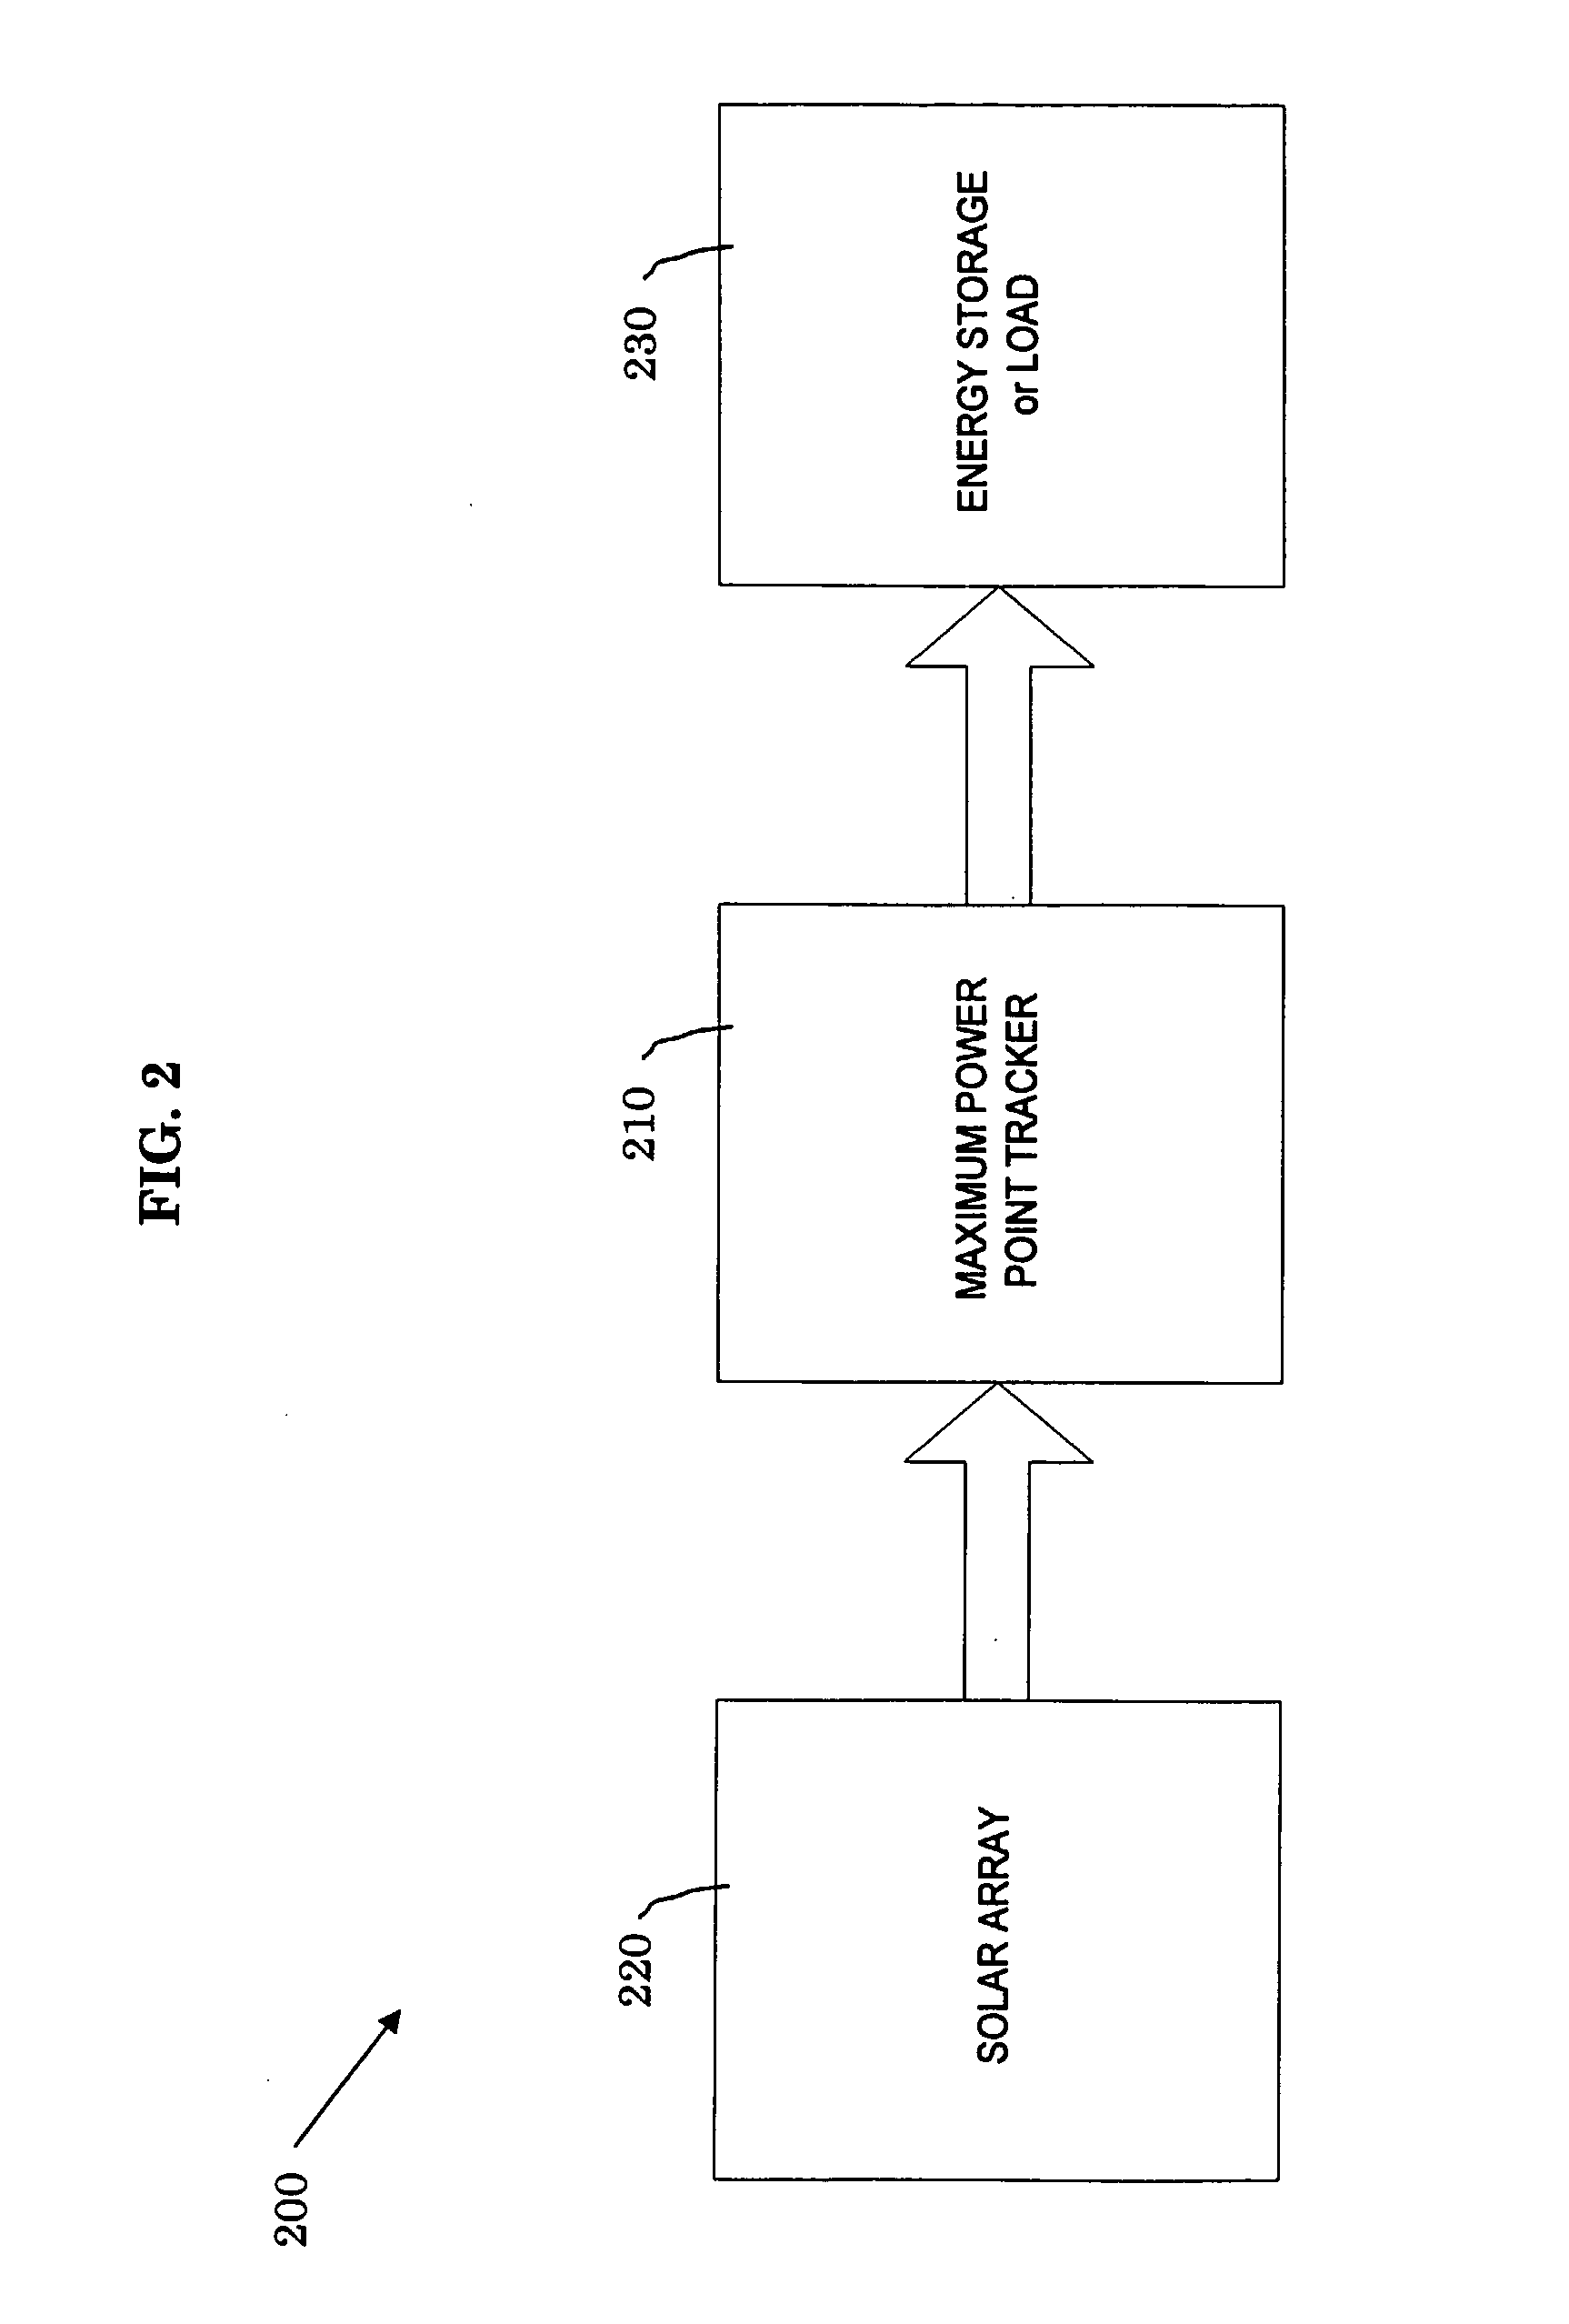 Systems and Methods for Providing Maximum Photovoltaic Peak Power Tracking